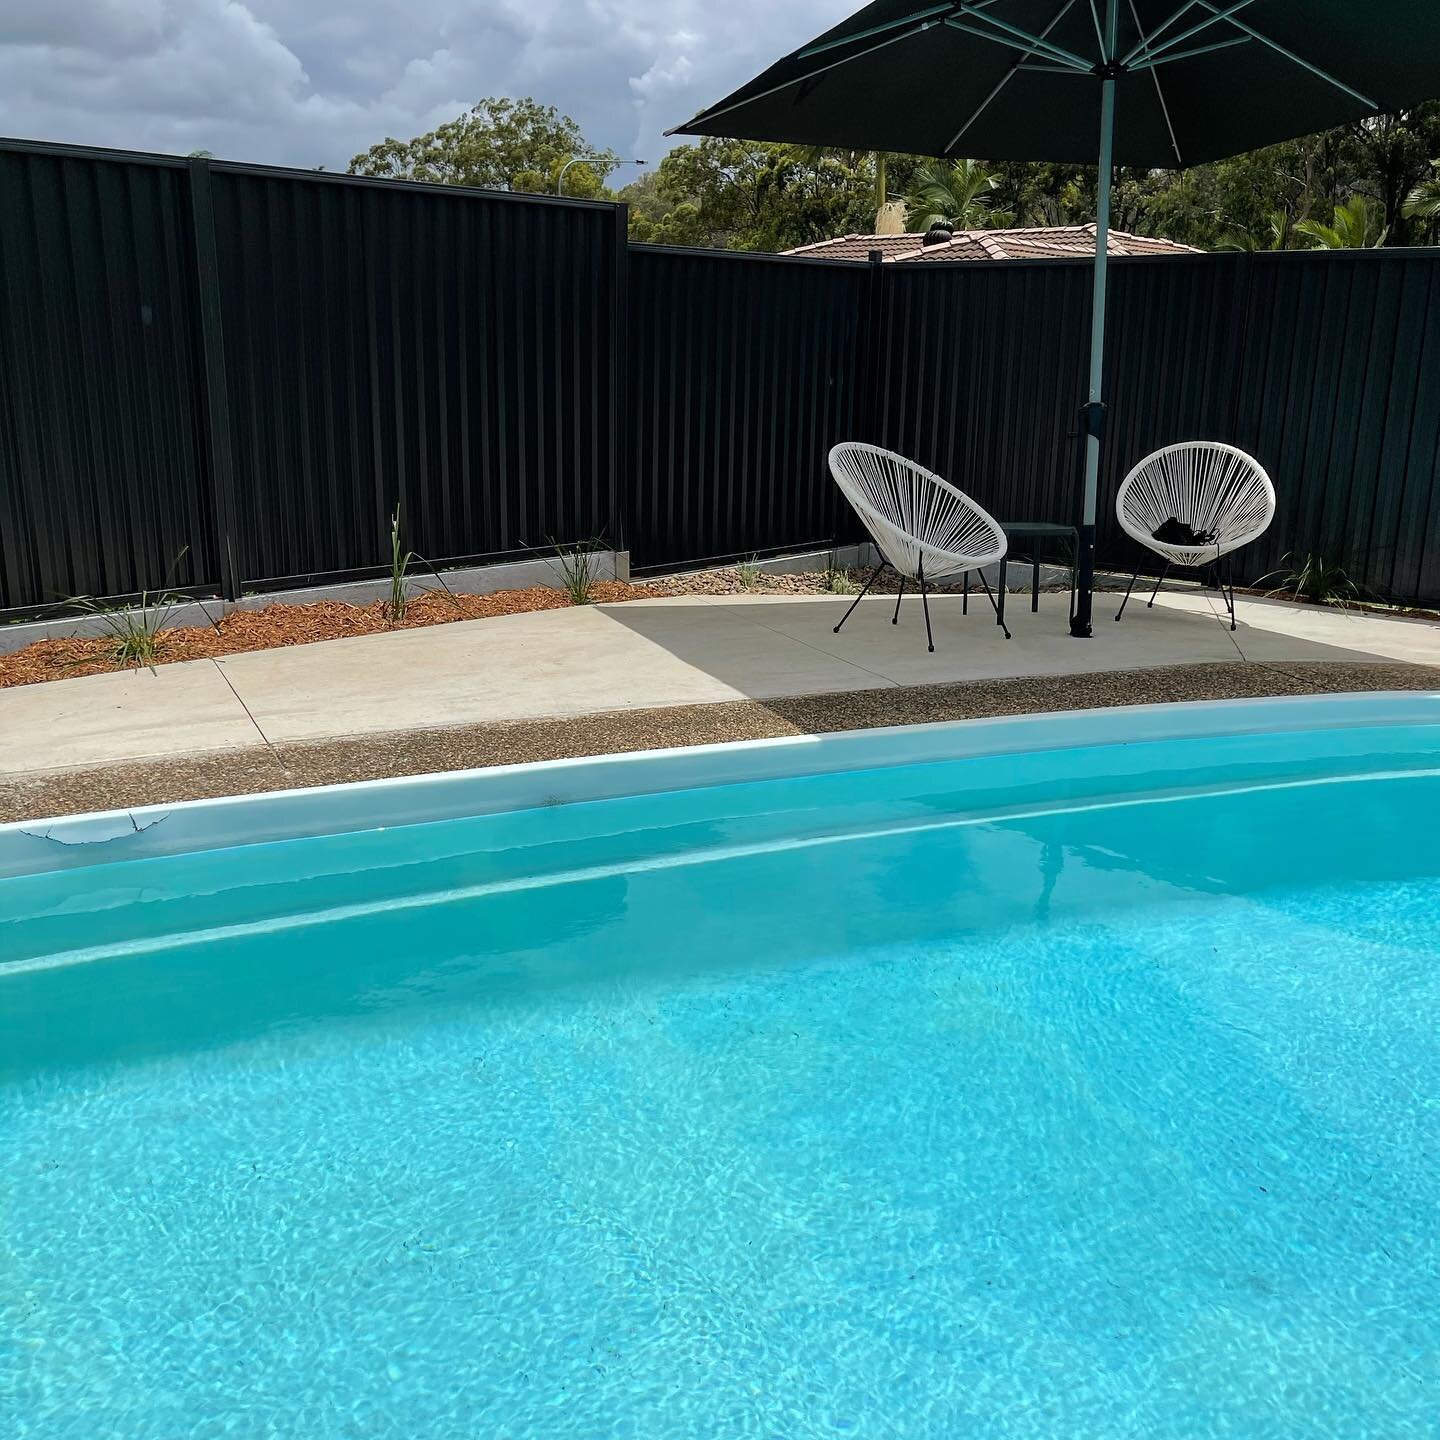 New space for Metropole residents to relax - could you be enjoying O-week in this pool? #studentlife #studentaccomodation #griffithuniversity